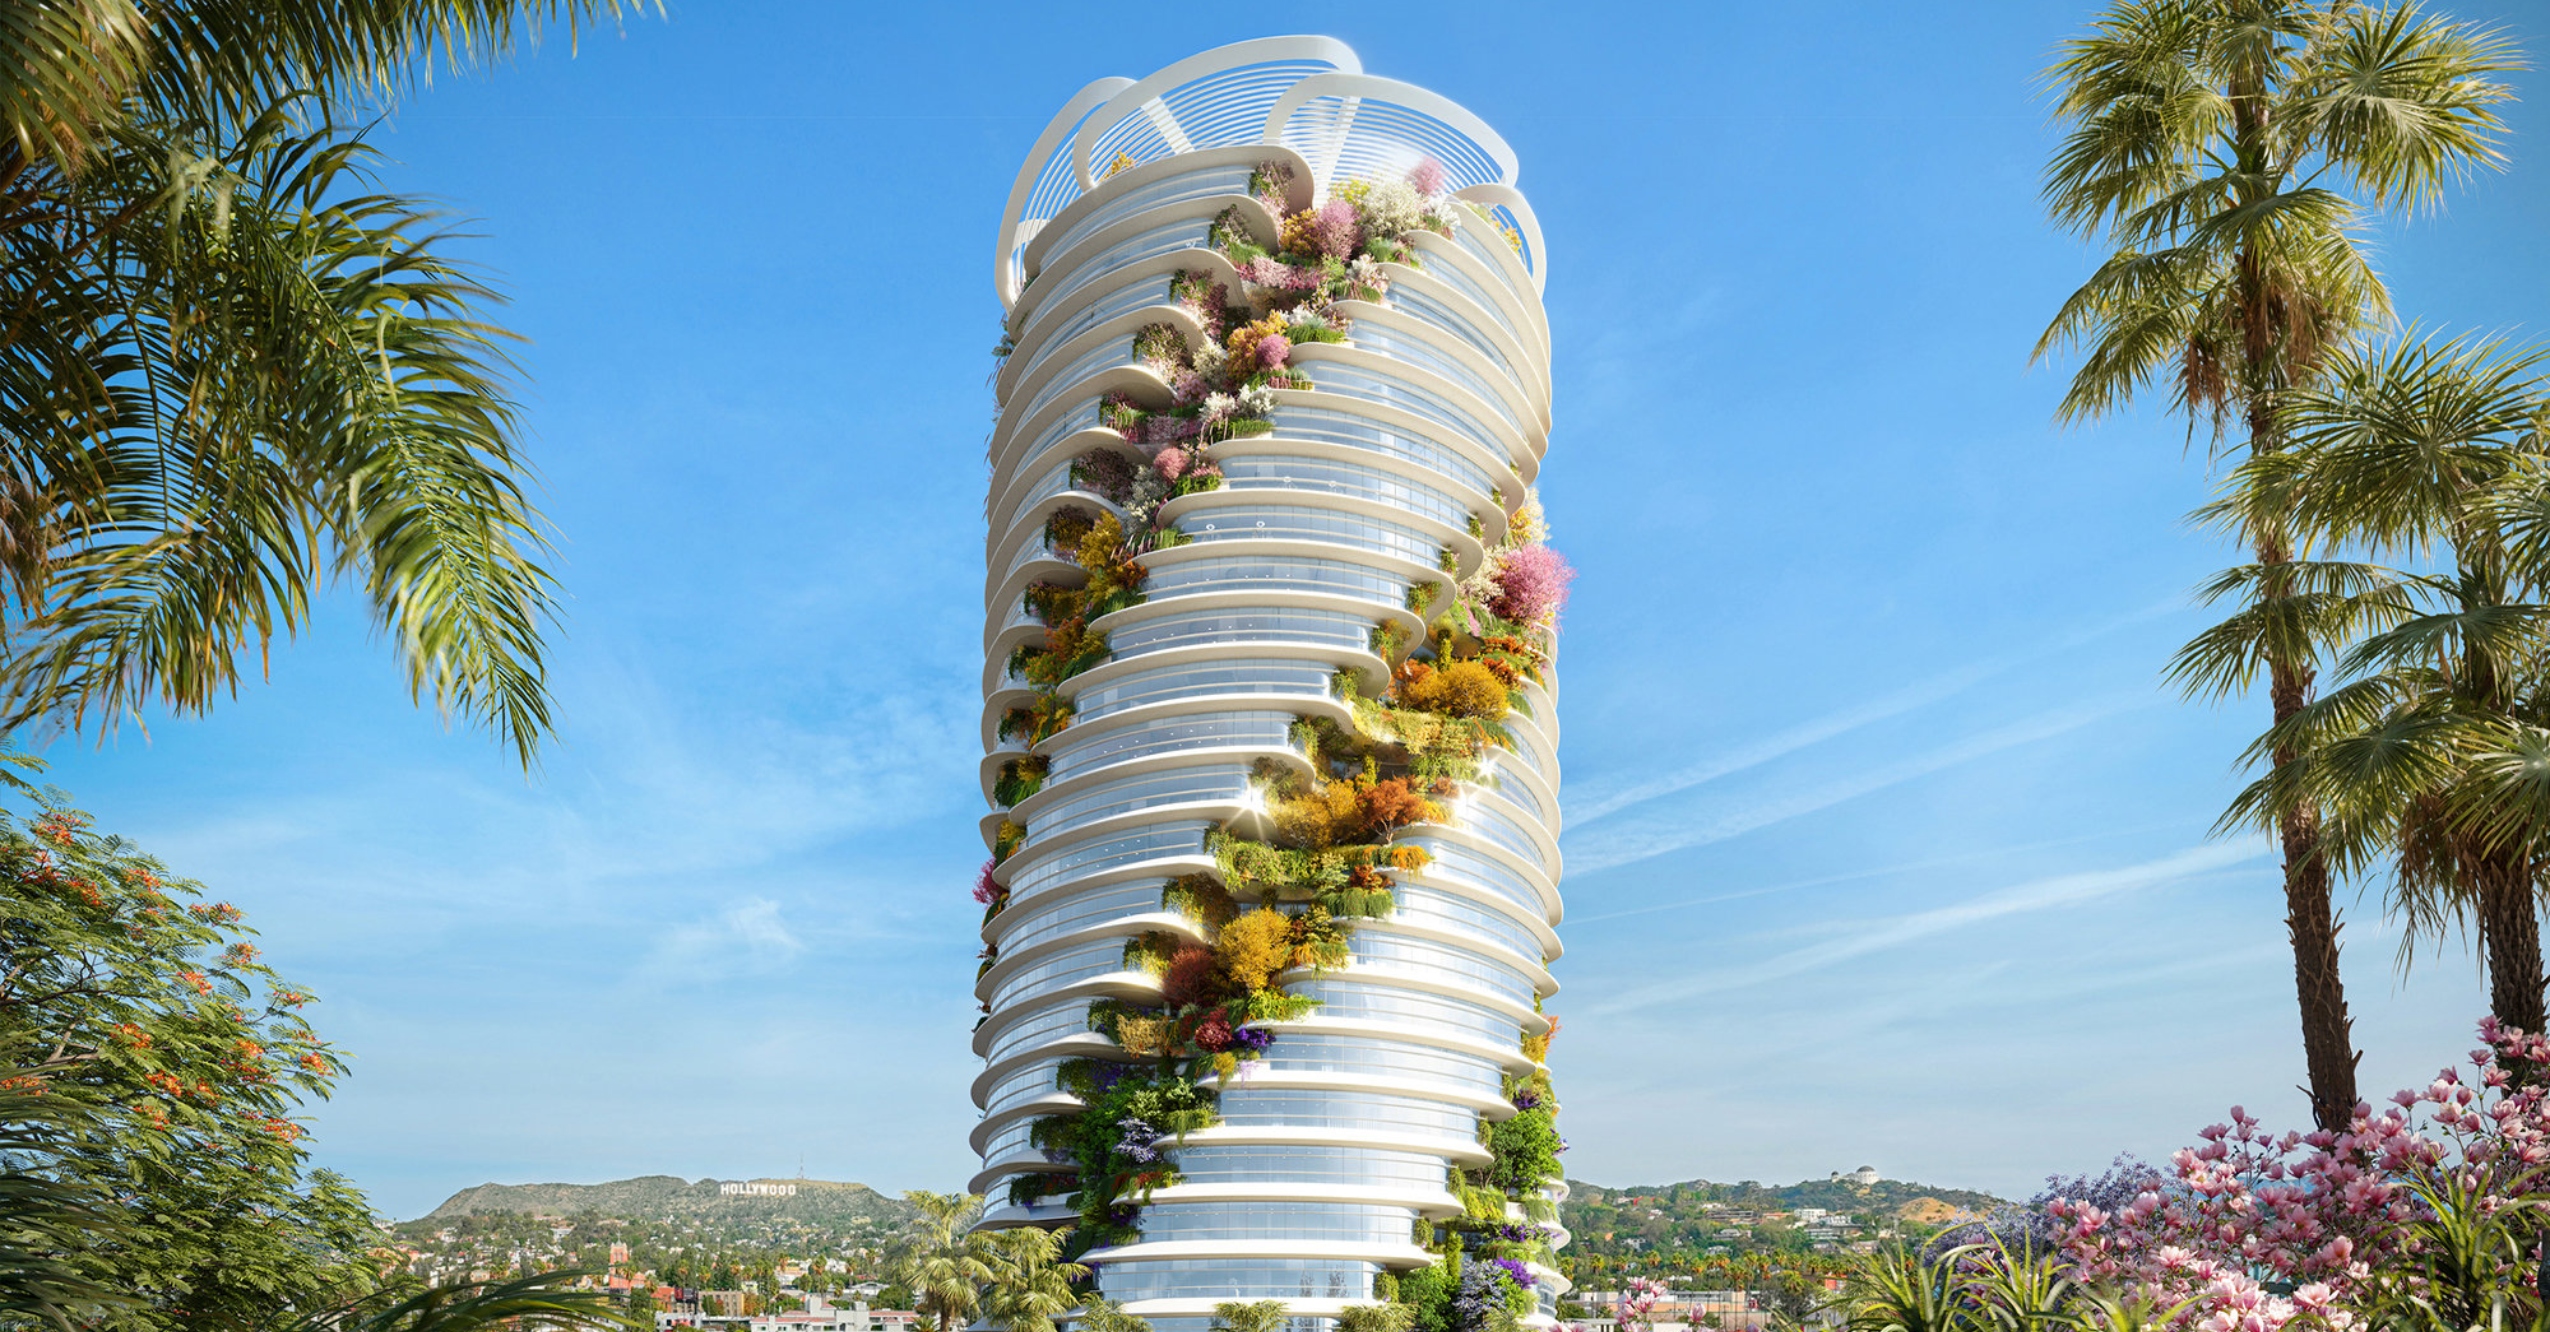 This $1 Billion Flower Tower Could Transform The Hollywood Skyline